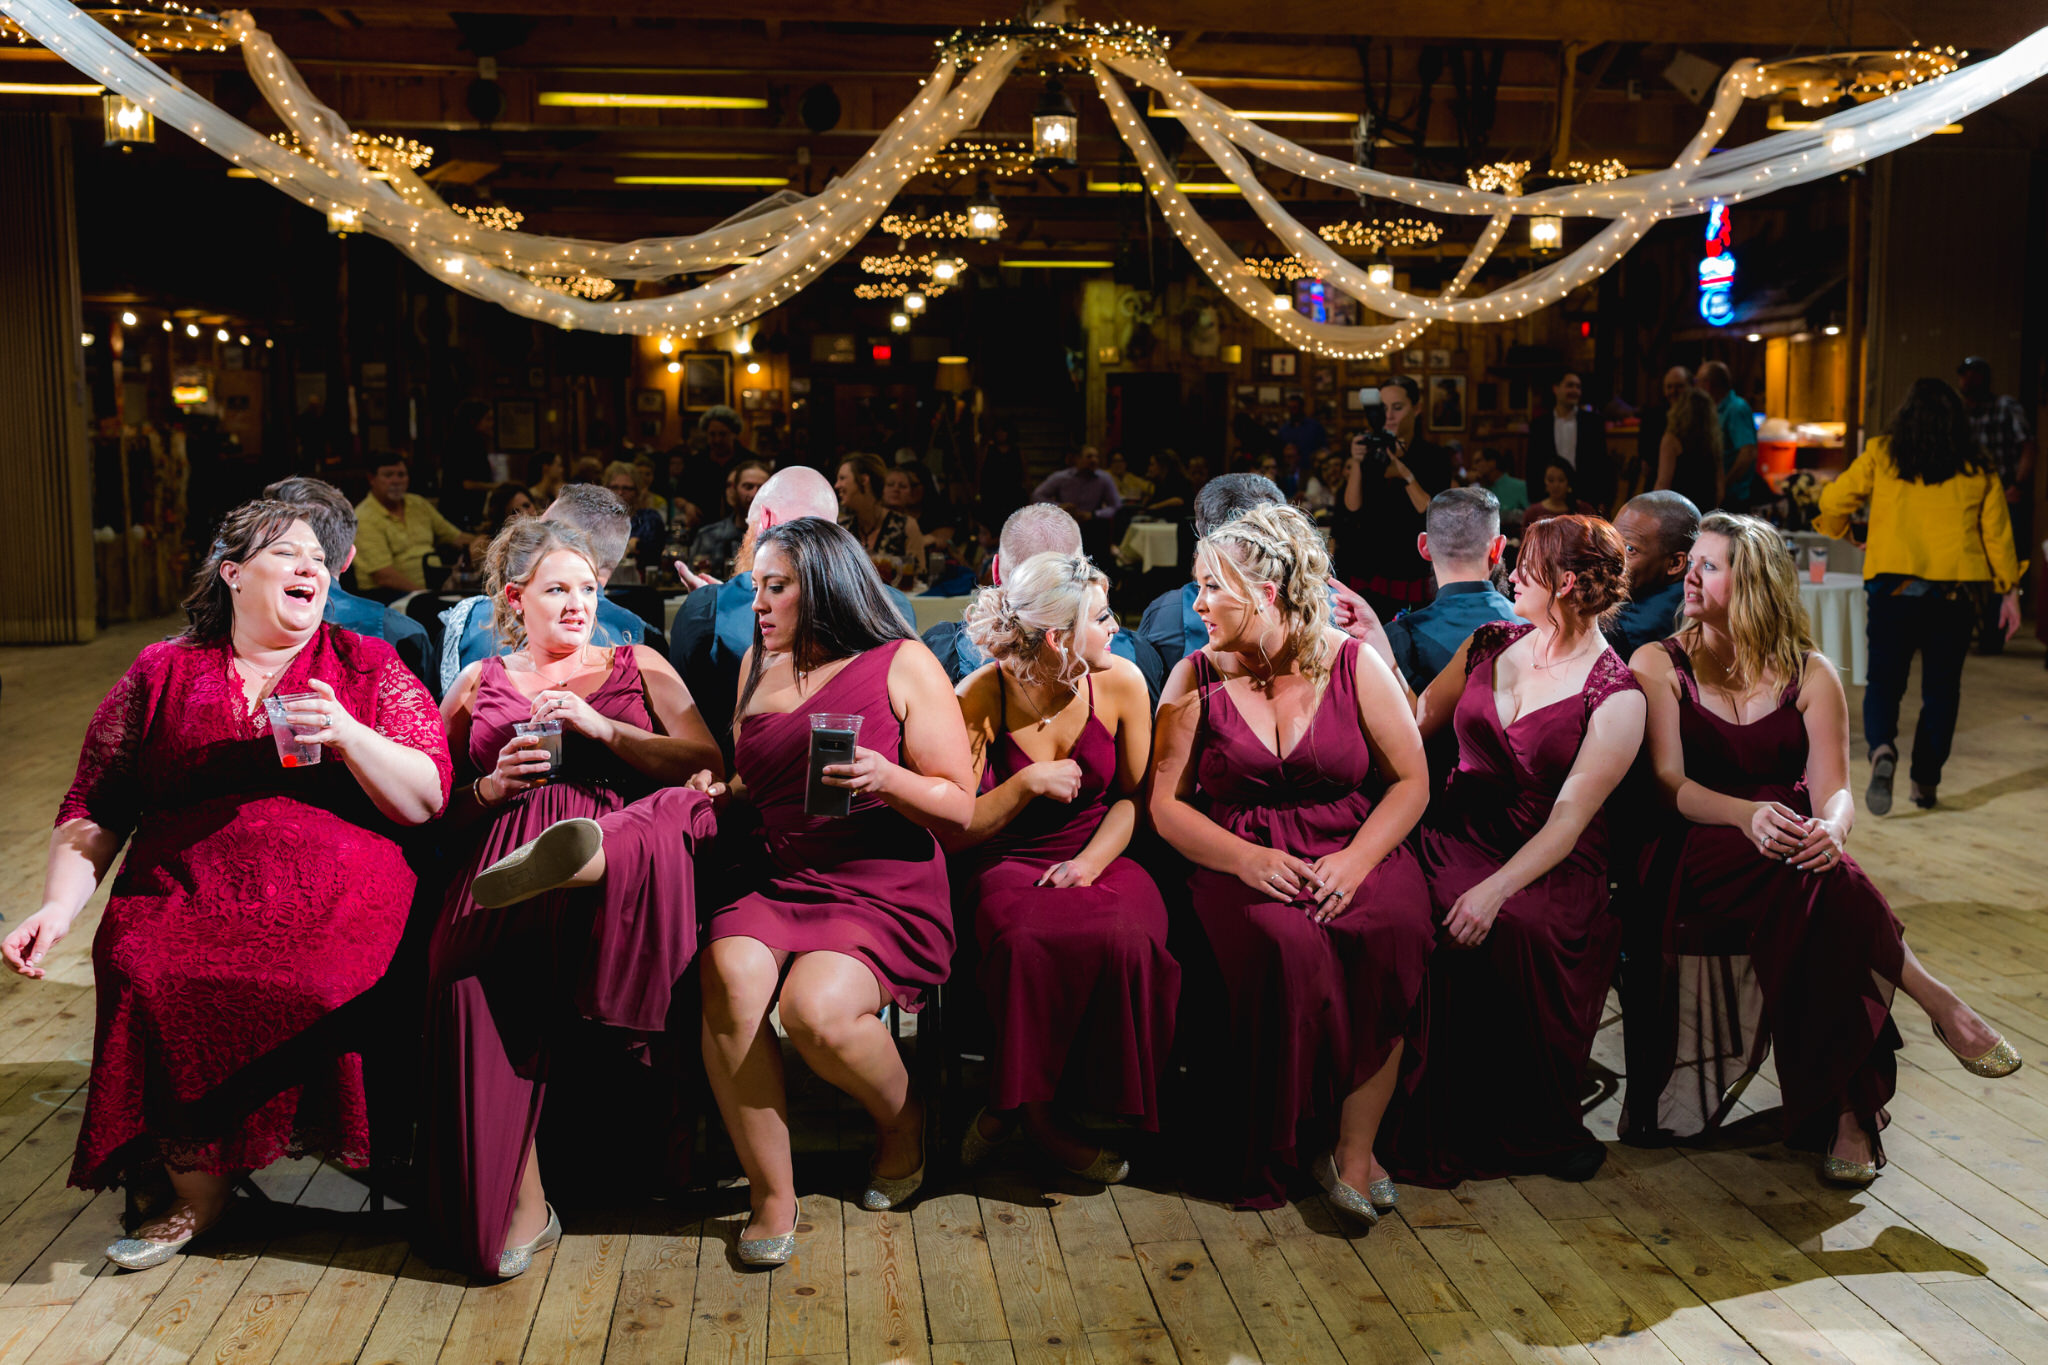 The bridesmaids about to play musical chairs against the groomsmen. Briana and Kevin's Terry Bison Ranch Wedding by Wyoming Wedding Photographer Jennifer Garza, Wyoming Wedding, Wyoming Wedding Photographer, Wyoming Engagement Photographer, Wyoming Bride, Couples Goals, Wyoming Wedding, Wedding Photographer, Wyoming Photographer, Wyoming Wedding Photography, Wedding Inspiration, Destination Wedding Photographer, Fall Wedding, Ranch Wedding, Rustic Wedding Inspiration, Wedding Dress Inspo